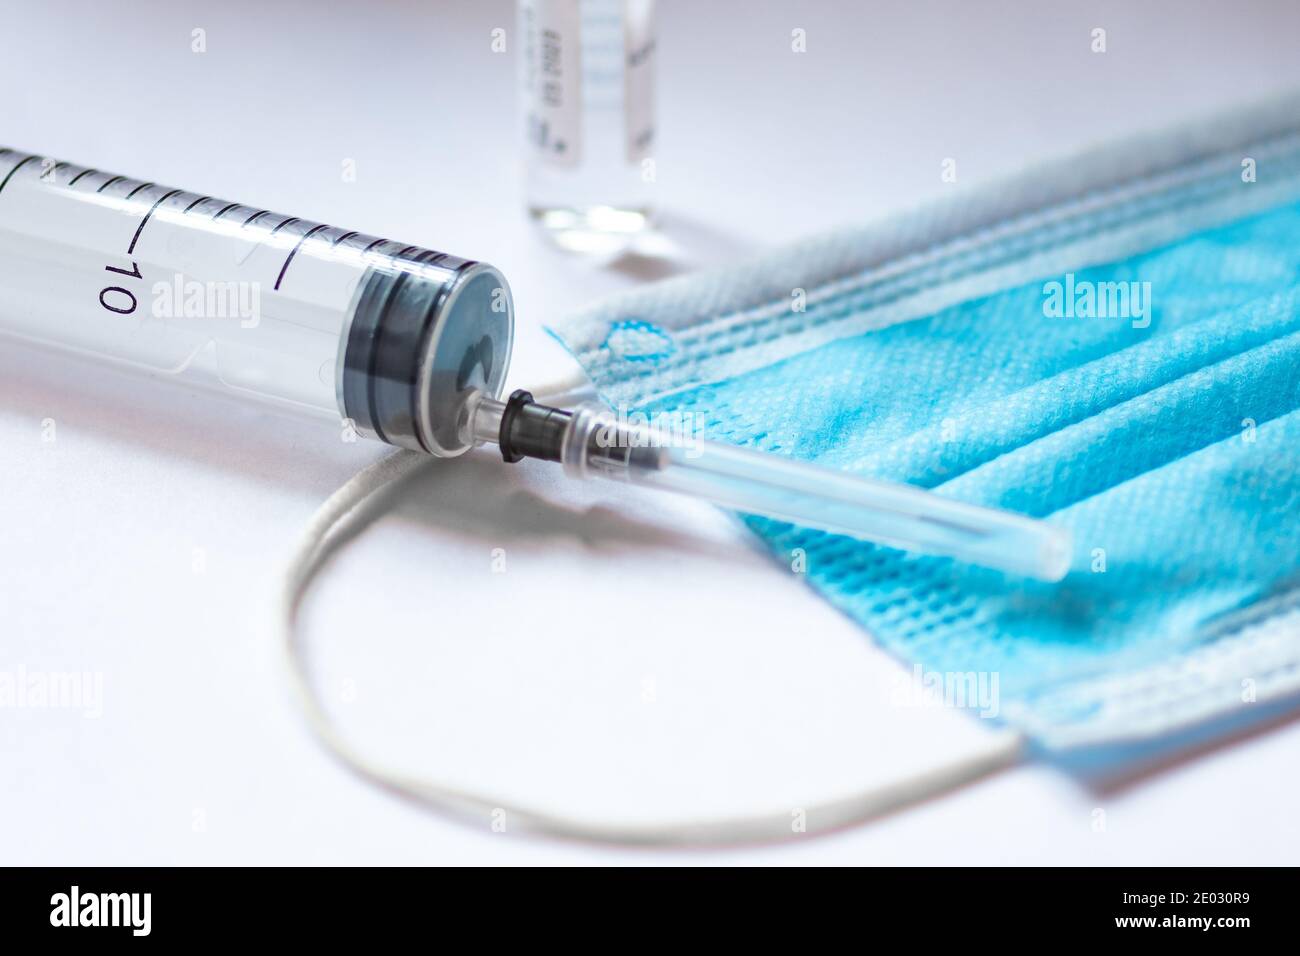 Syringe, vial and surgical face mask on a white table. Covid or Coronavirus vaccine background Stock Photo